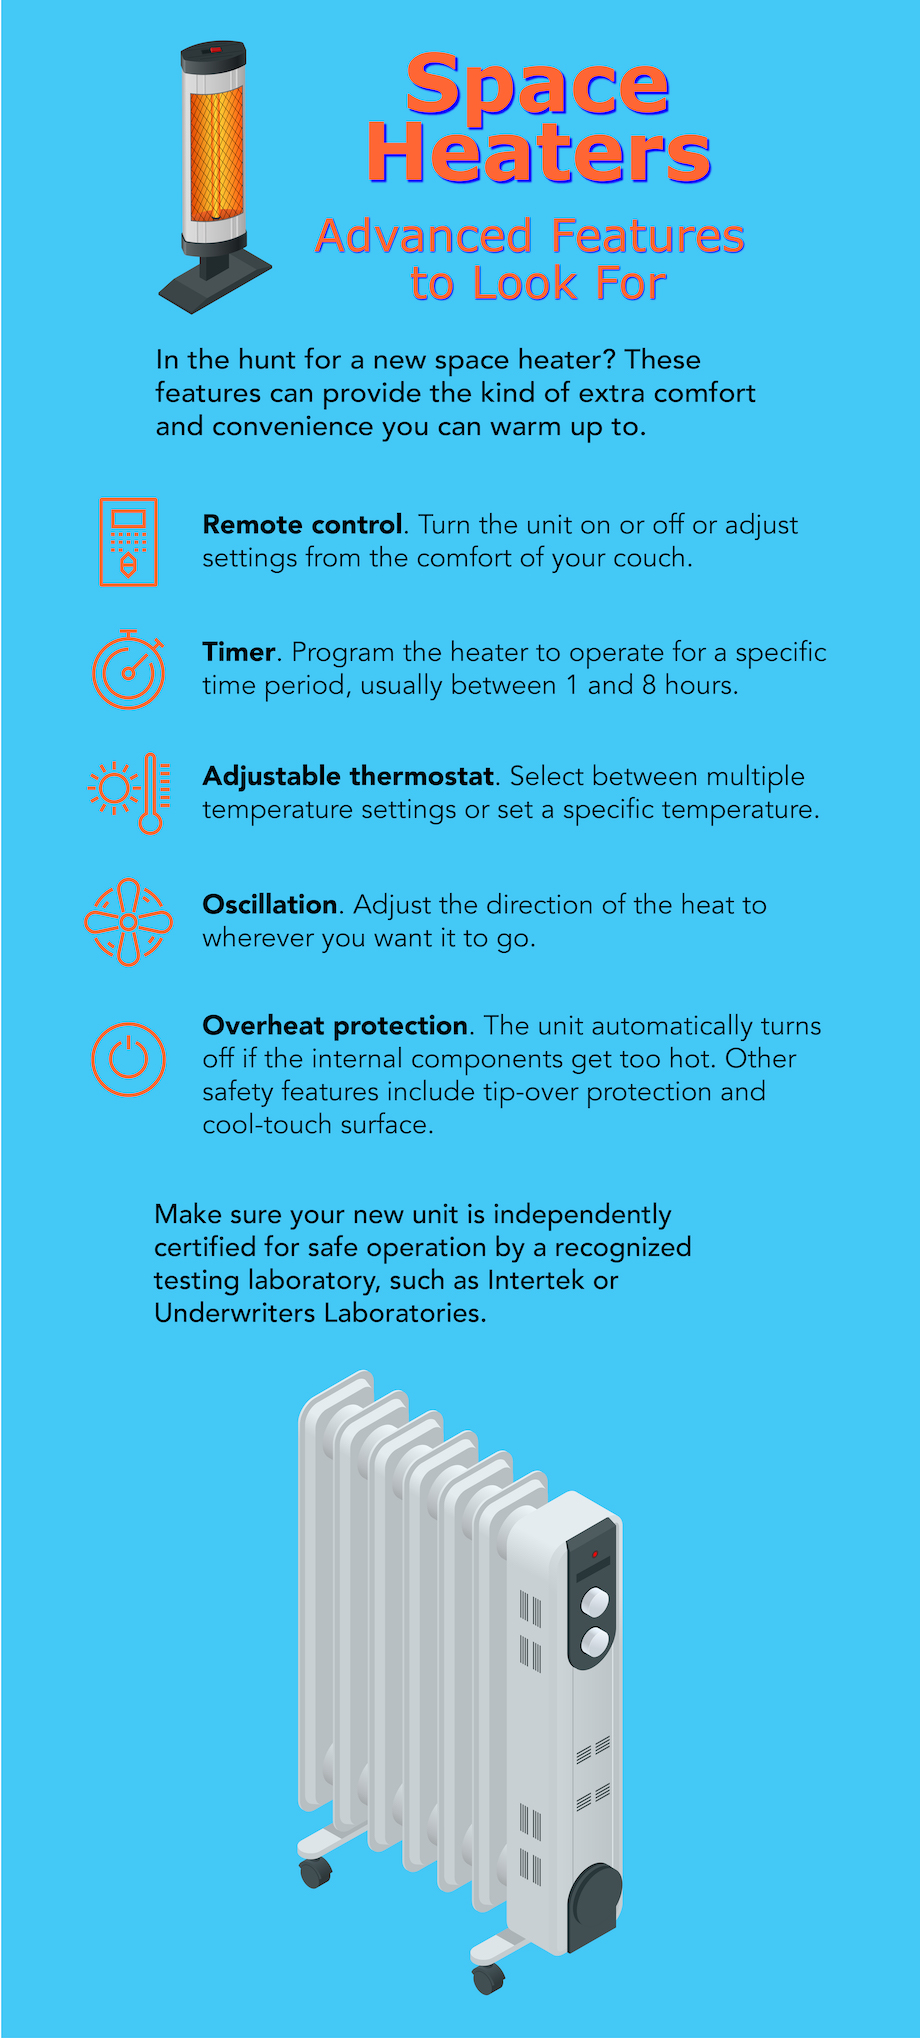 Space Heaters Advanced Features to Look For Infographic